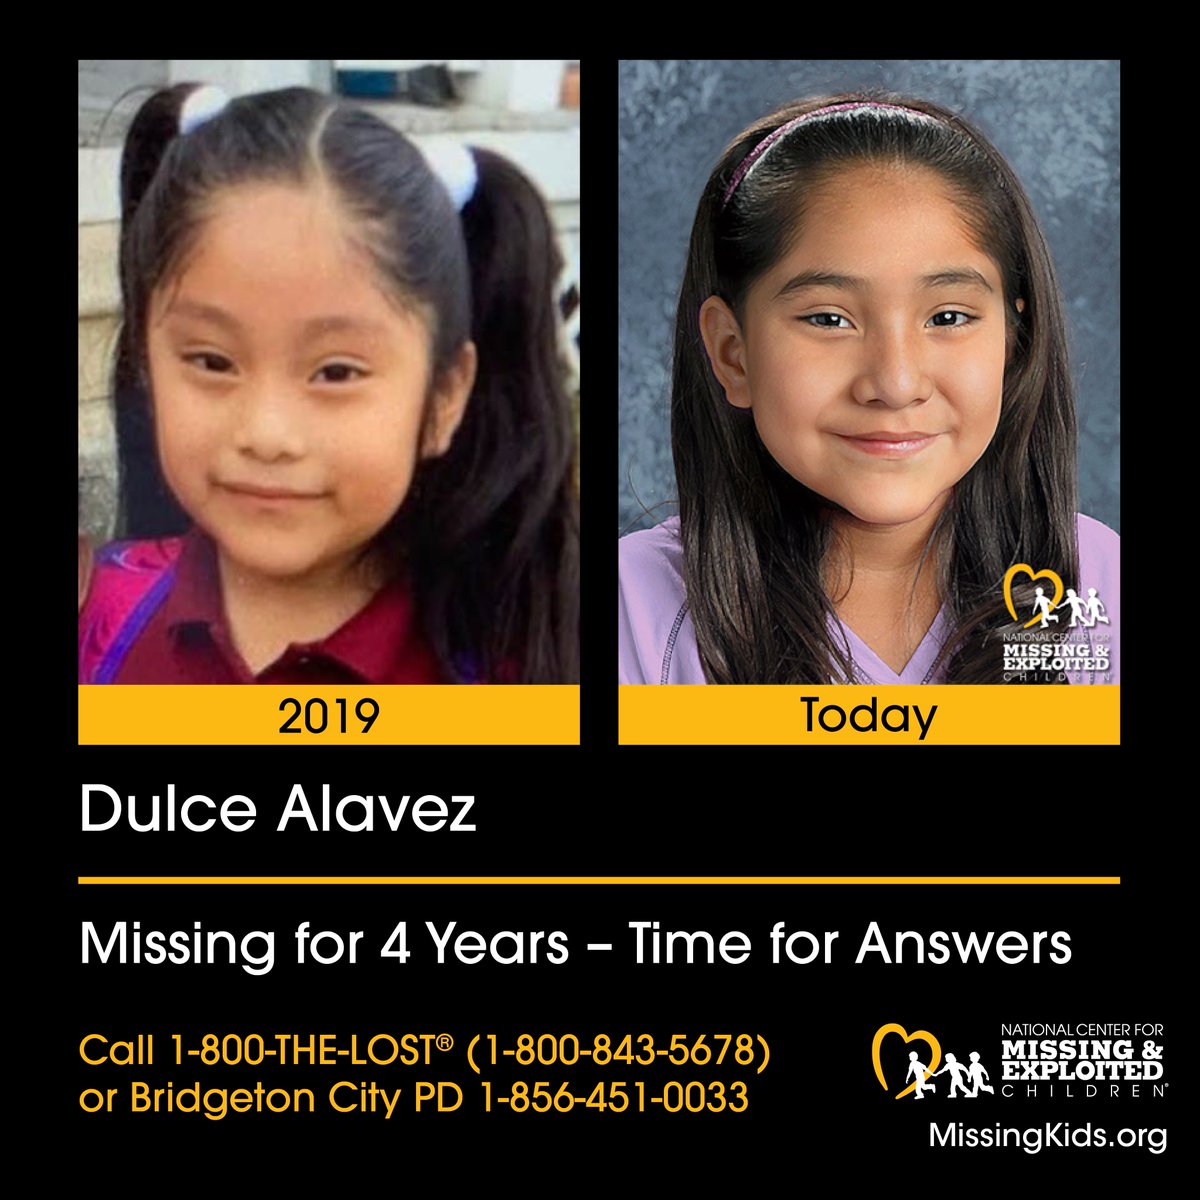 Today, Dulce Alavez turns 10. We urge you to share her #missing poster and contact the police or NCMEC at 1-800-843-5678 if you have any information regarding her disappearance. 

We remain committed to providing unwavering support to the dedicated detectives working to bring…